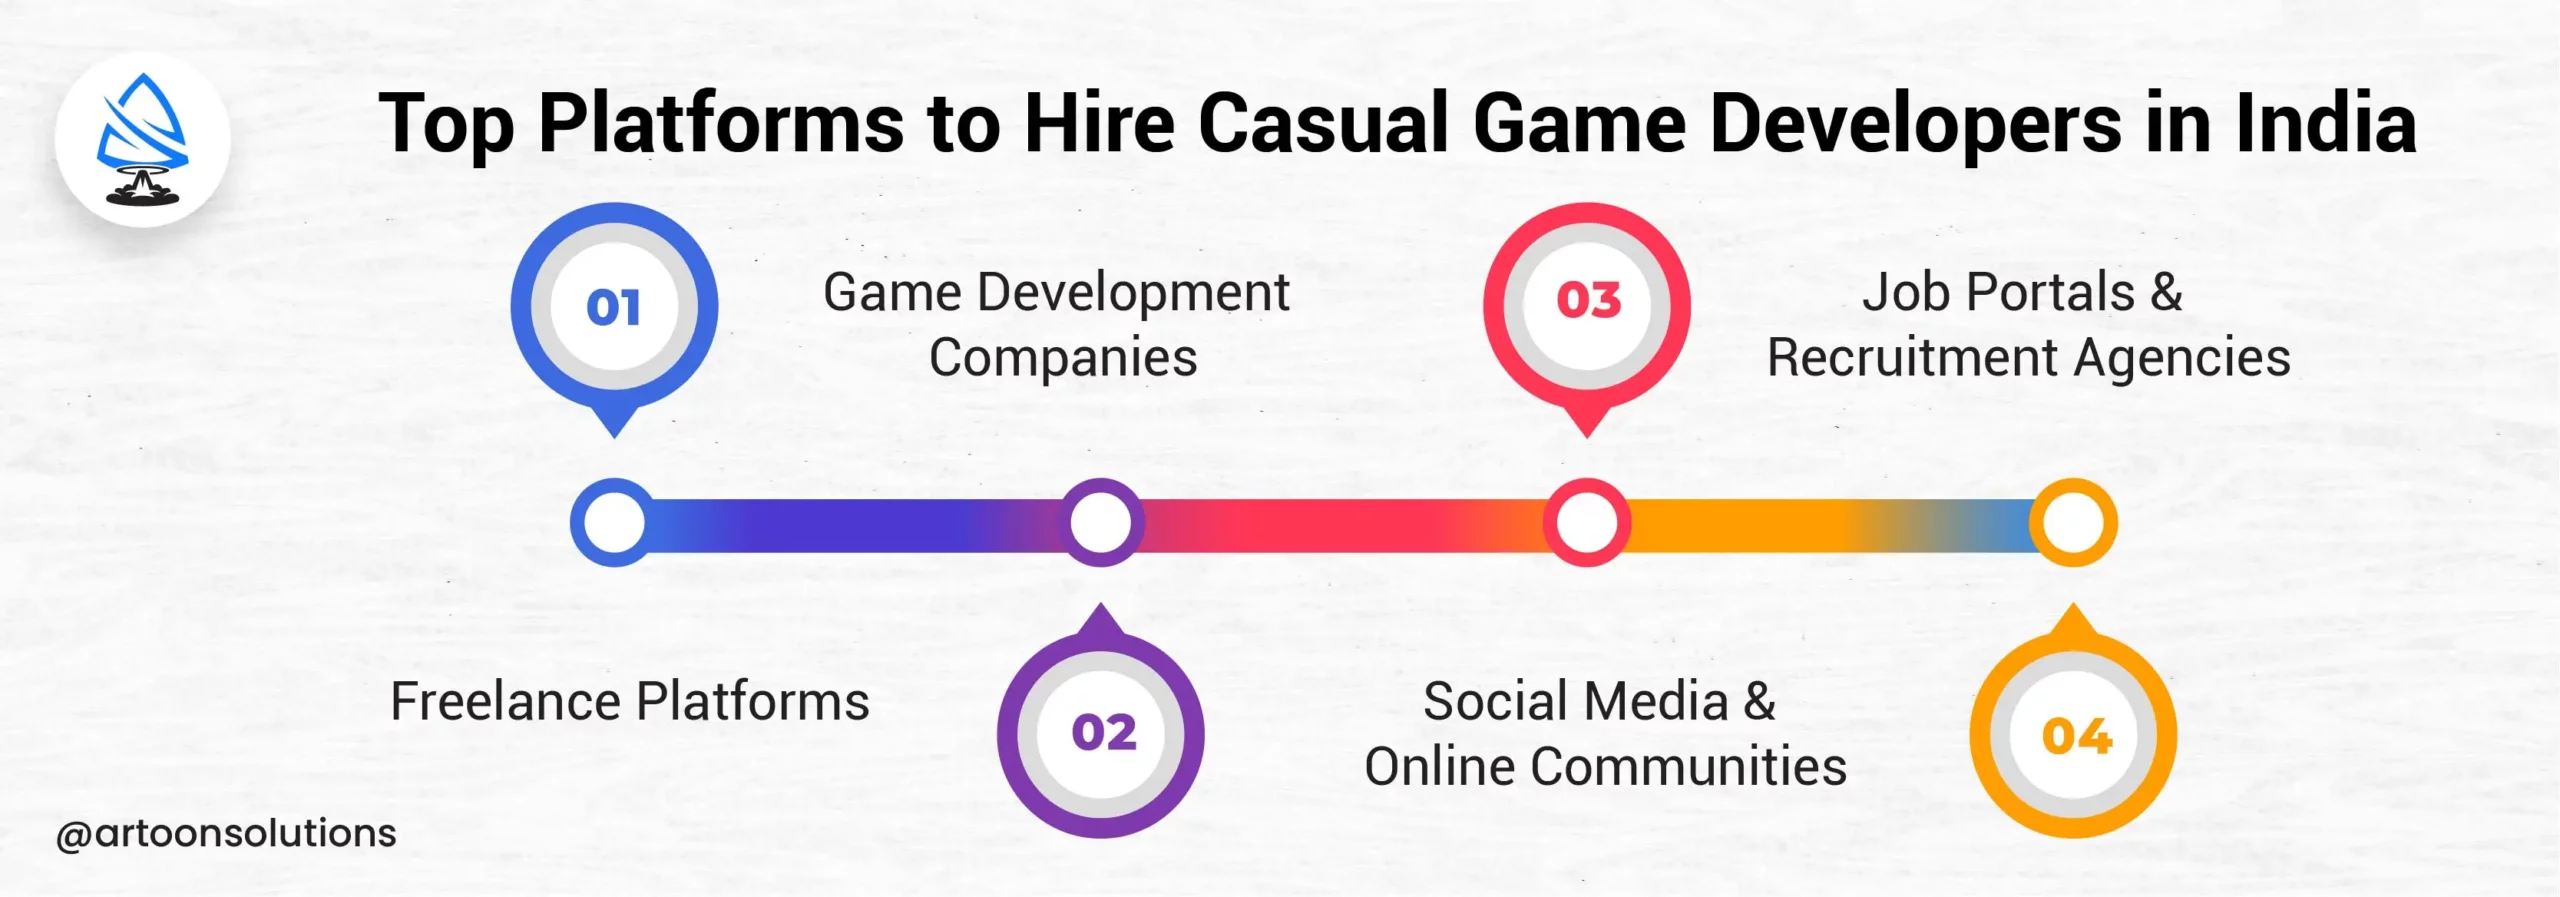 Top Platforms to Hire Casual Game Developers in India - casual game developers